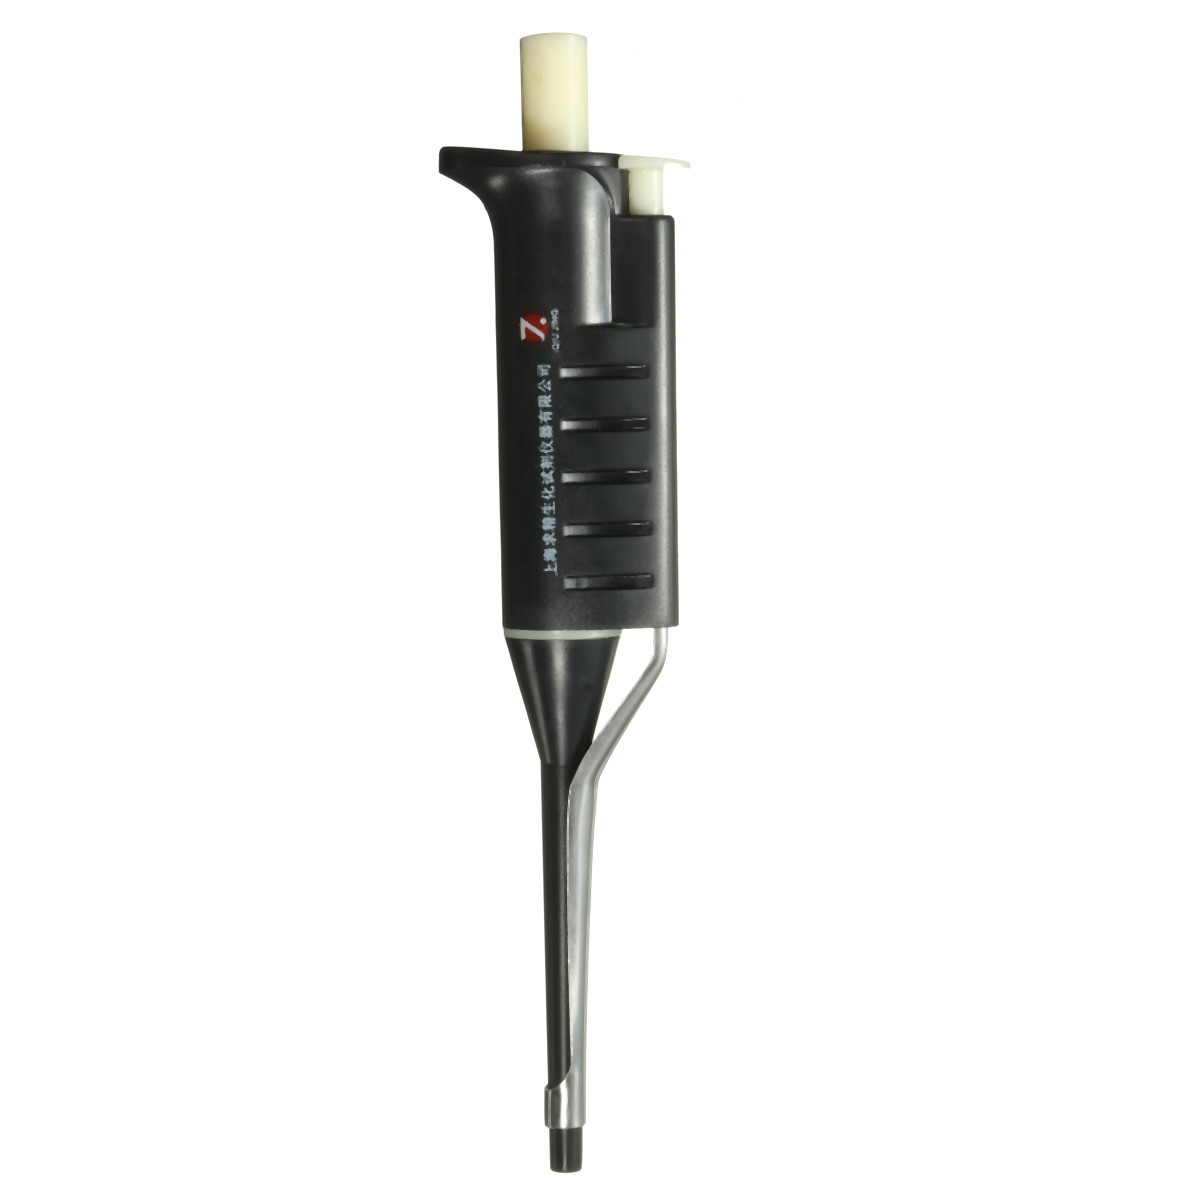 100ul-500ul-Lab-Micro-Transfer-Pipette-Adjustable-5-Volume-with-3-Pipettor-1068596